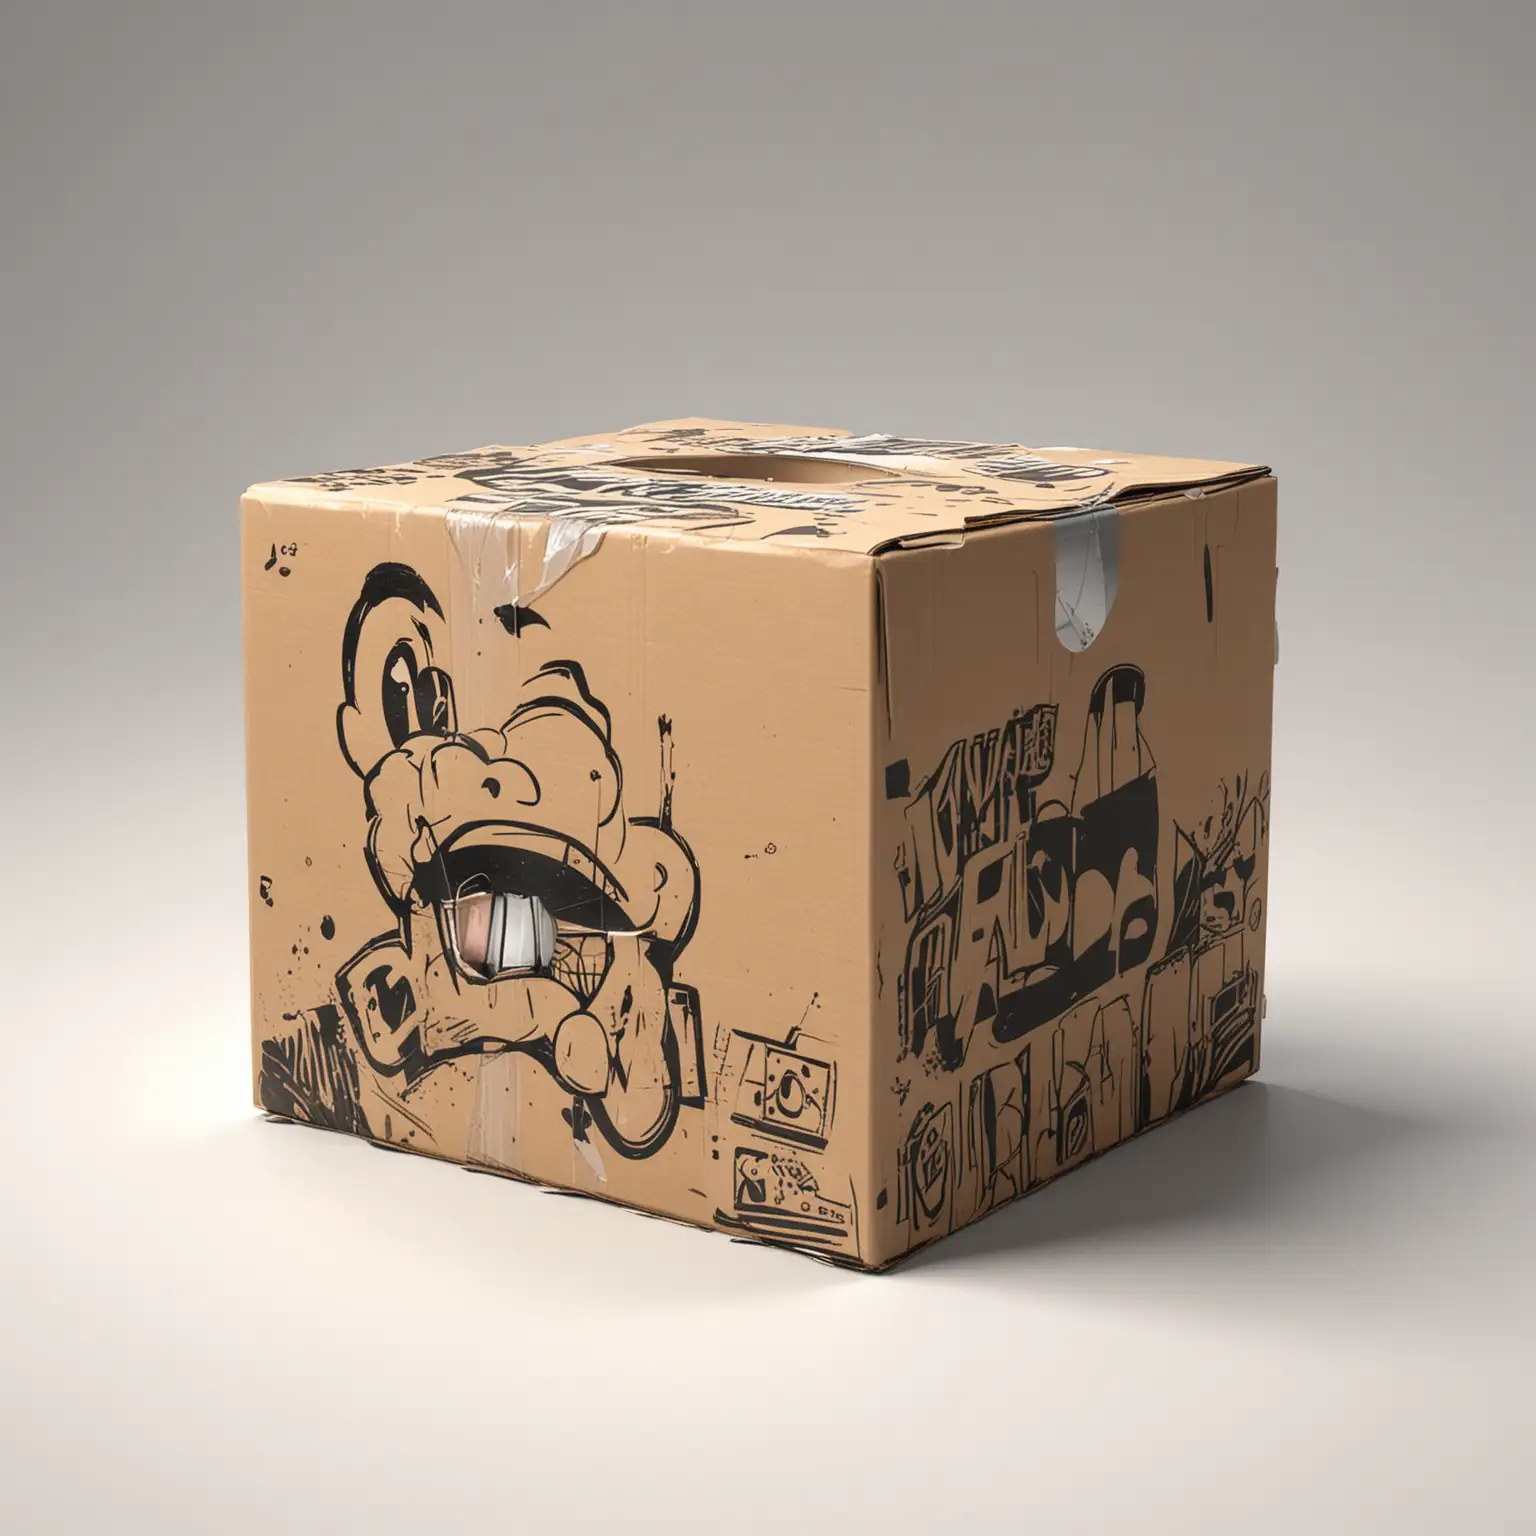 Closed Cardboard Box with Duct Tape and Graffiti on White Background